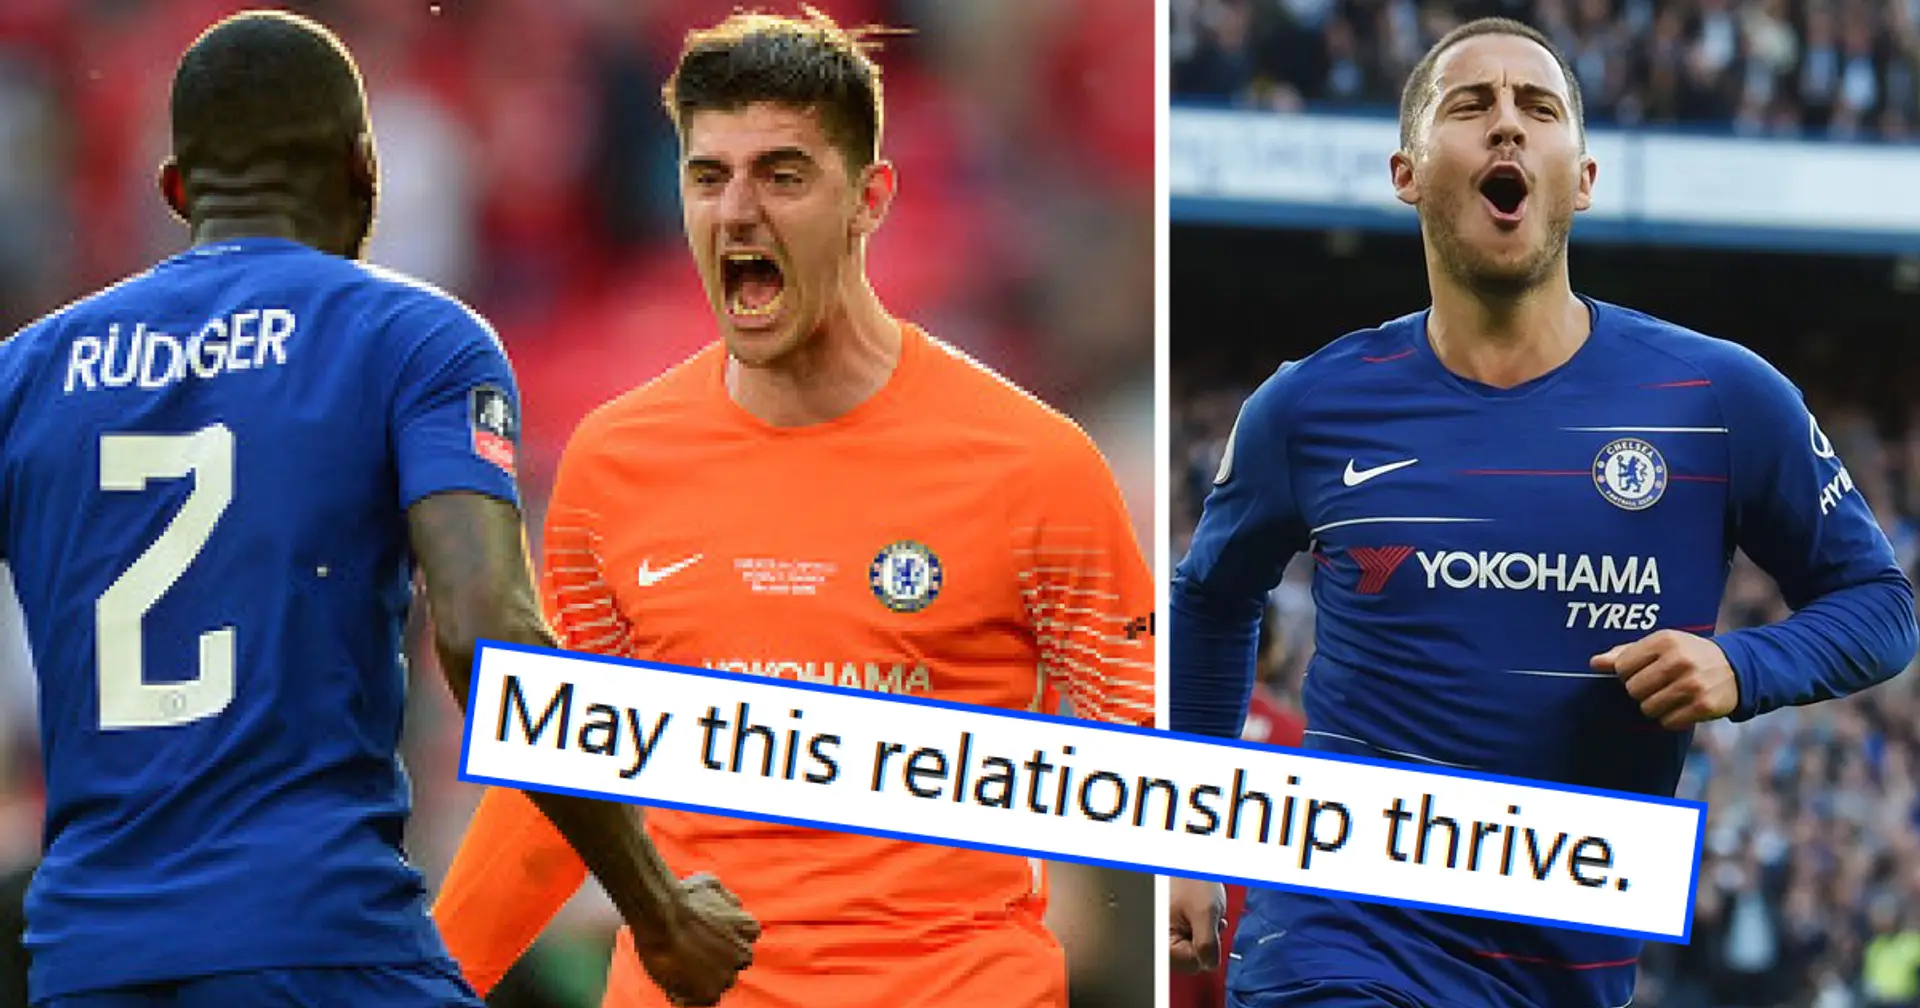 'Start packing cuz you're next': Real Madrid fans want another Chelsea player after Courtois, Hazard and Rudiger